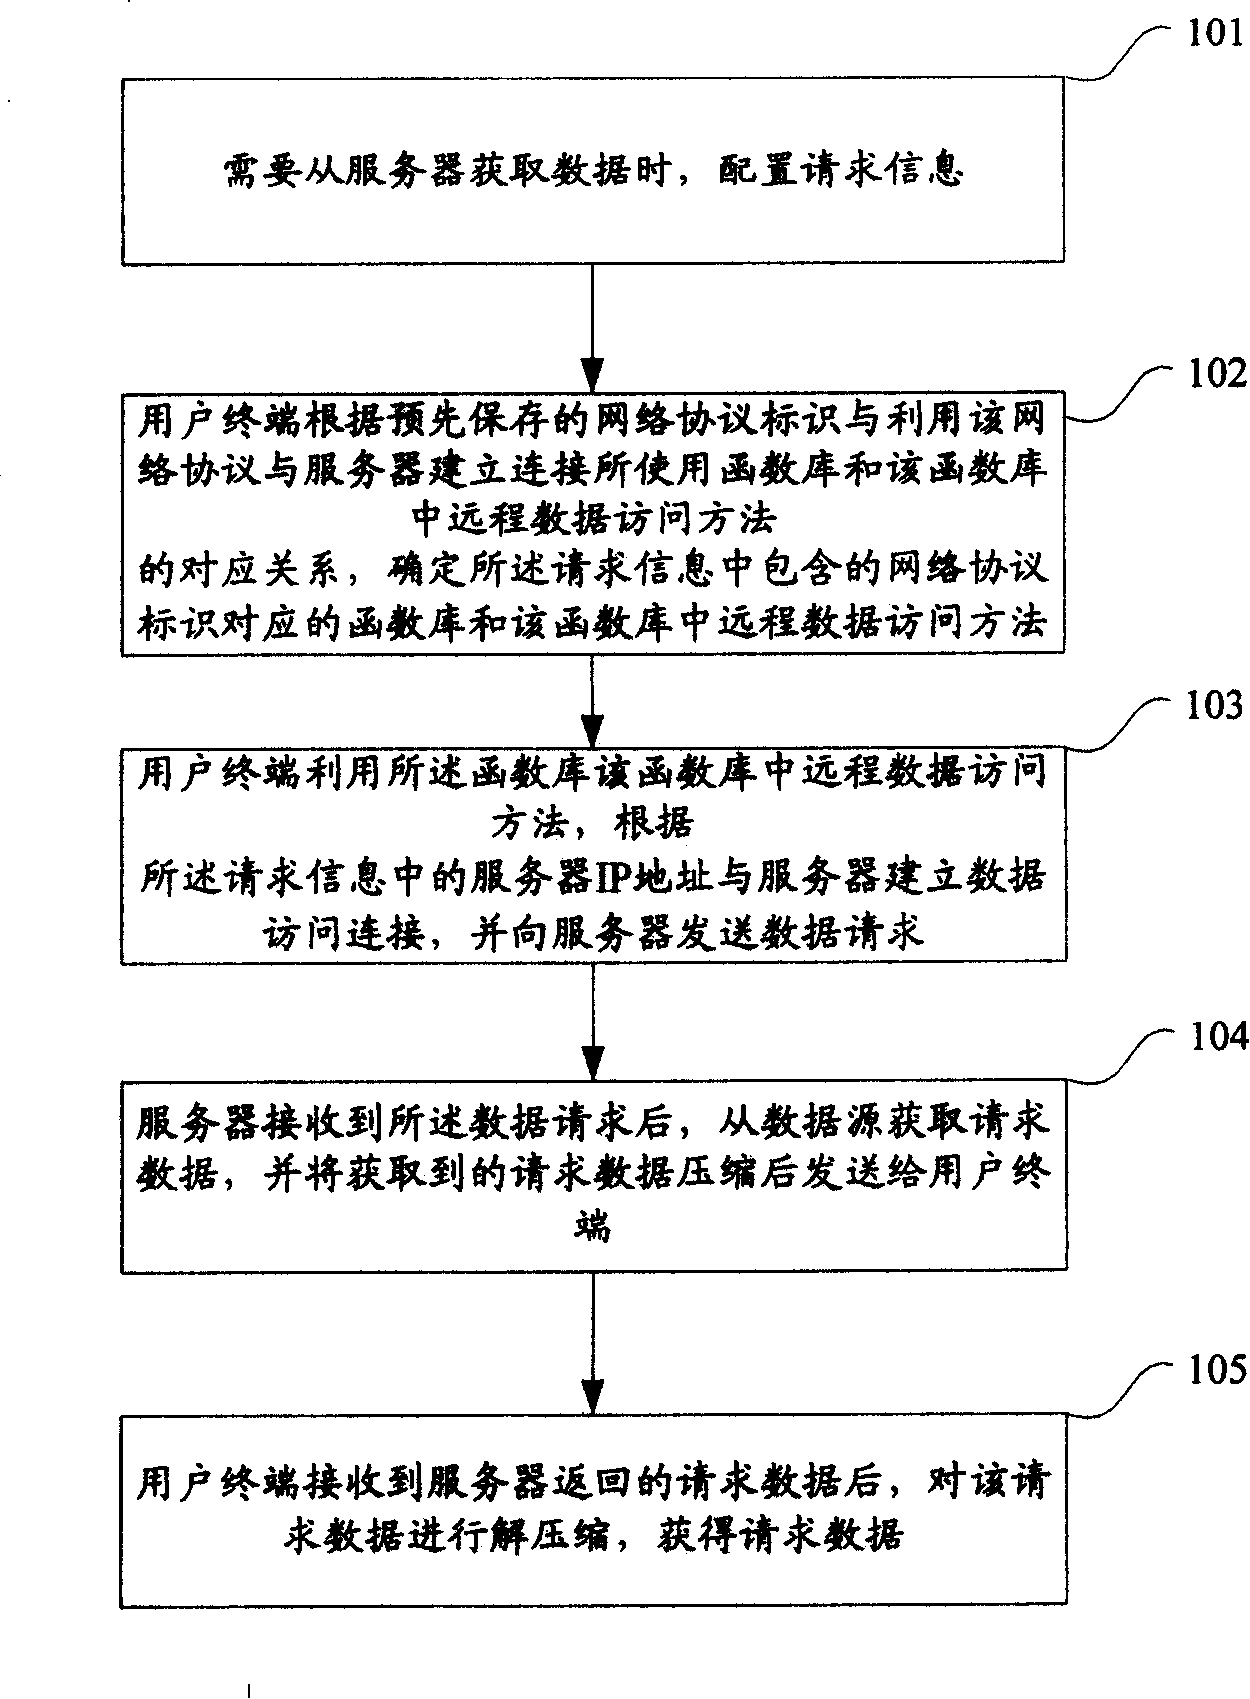 A method, system and user terminal for establishing access connection